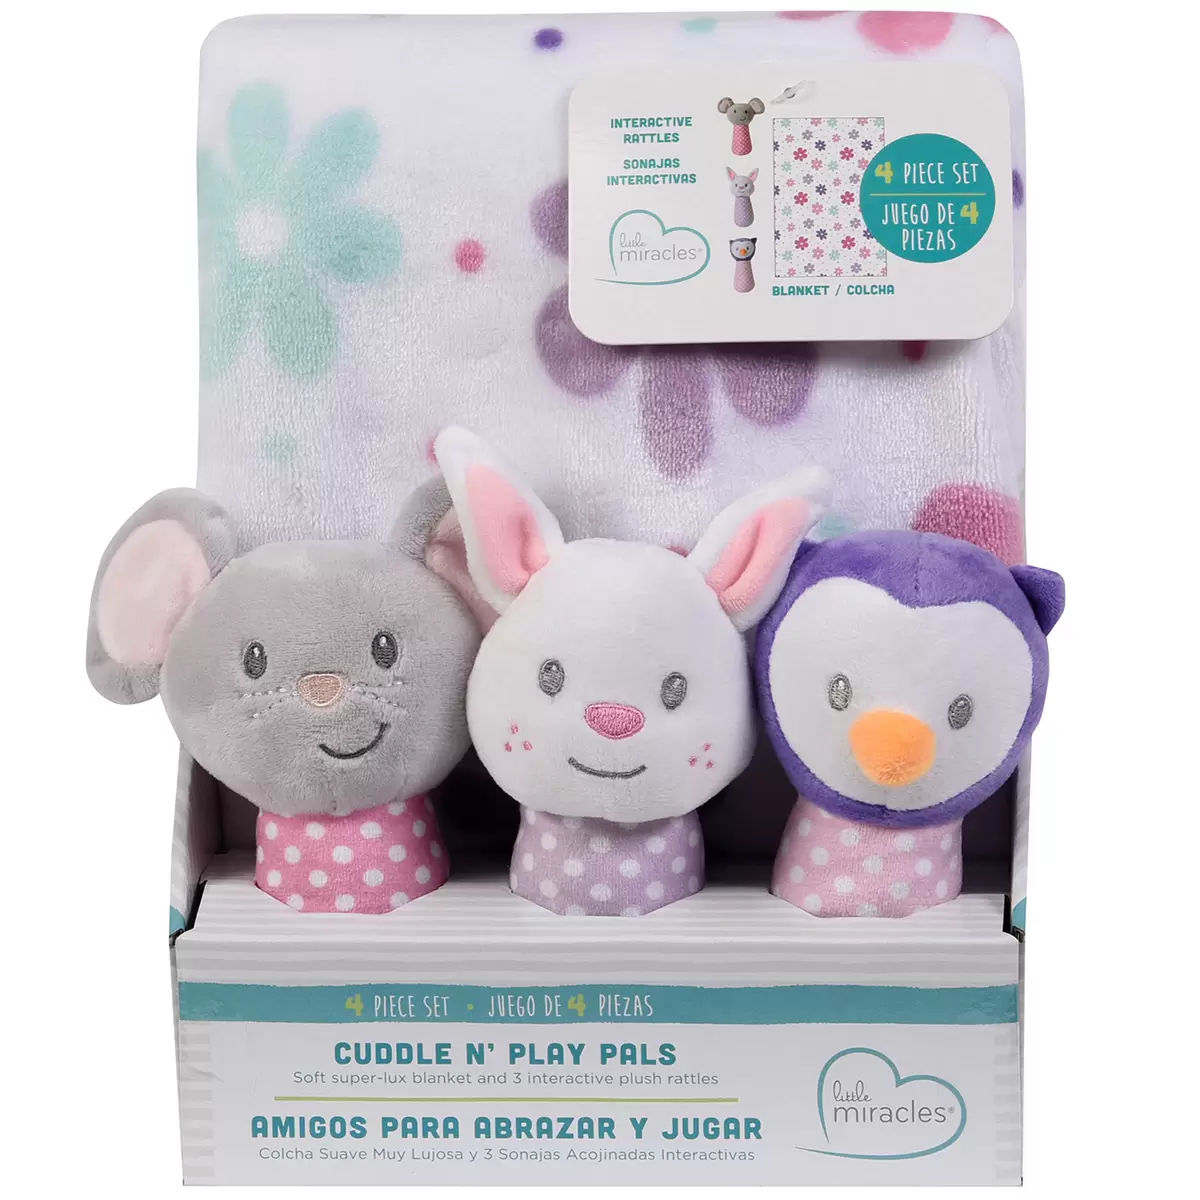 Little Miracles Cuddle N' Play Pals Set 4 Piece 